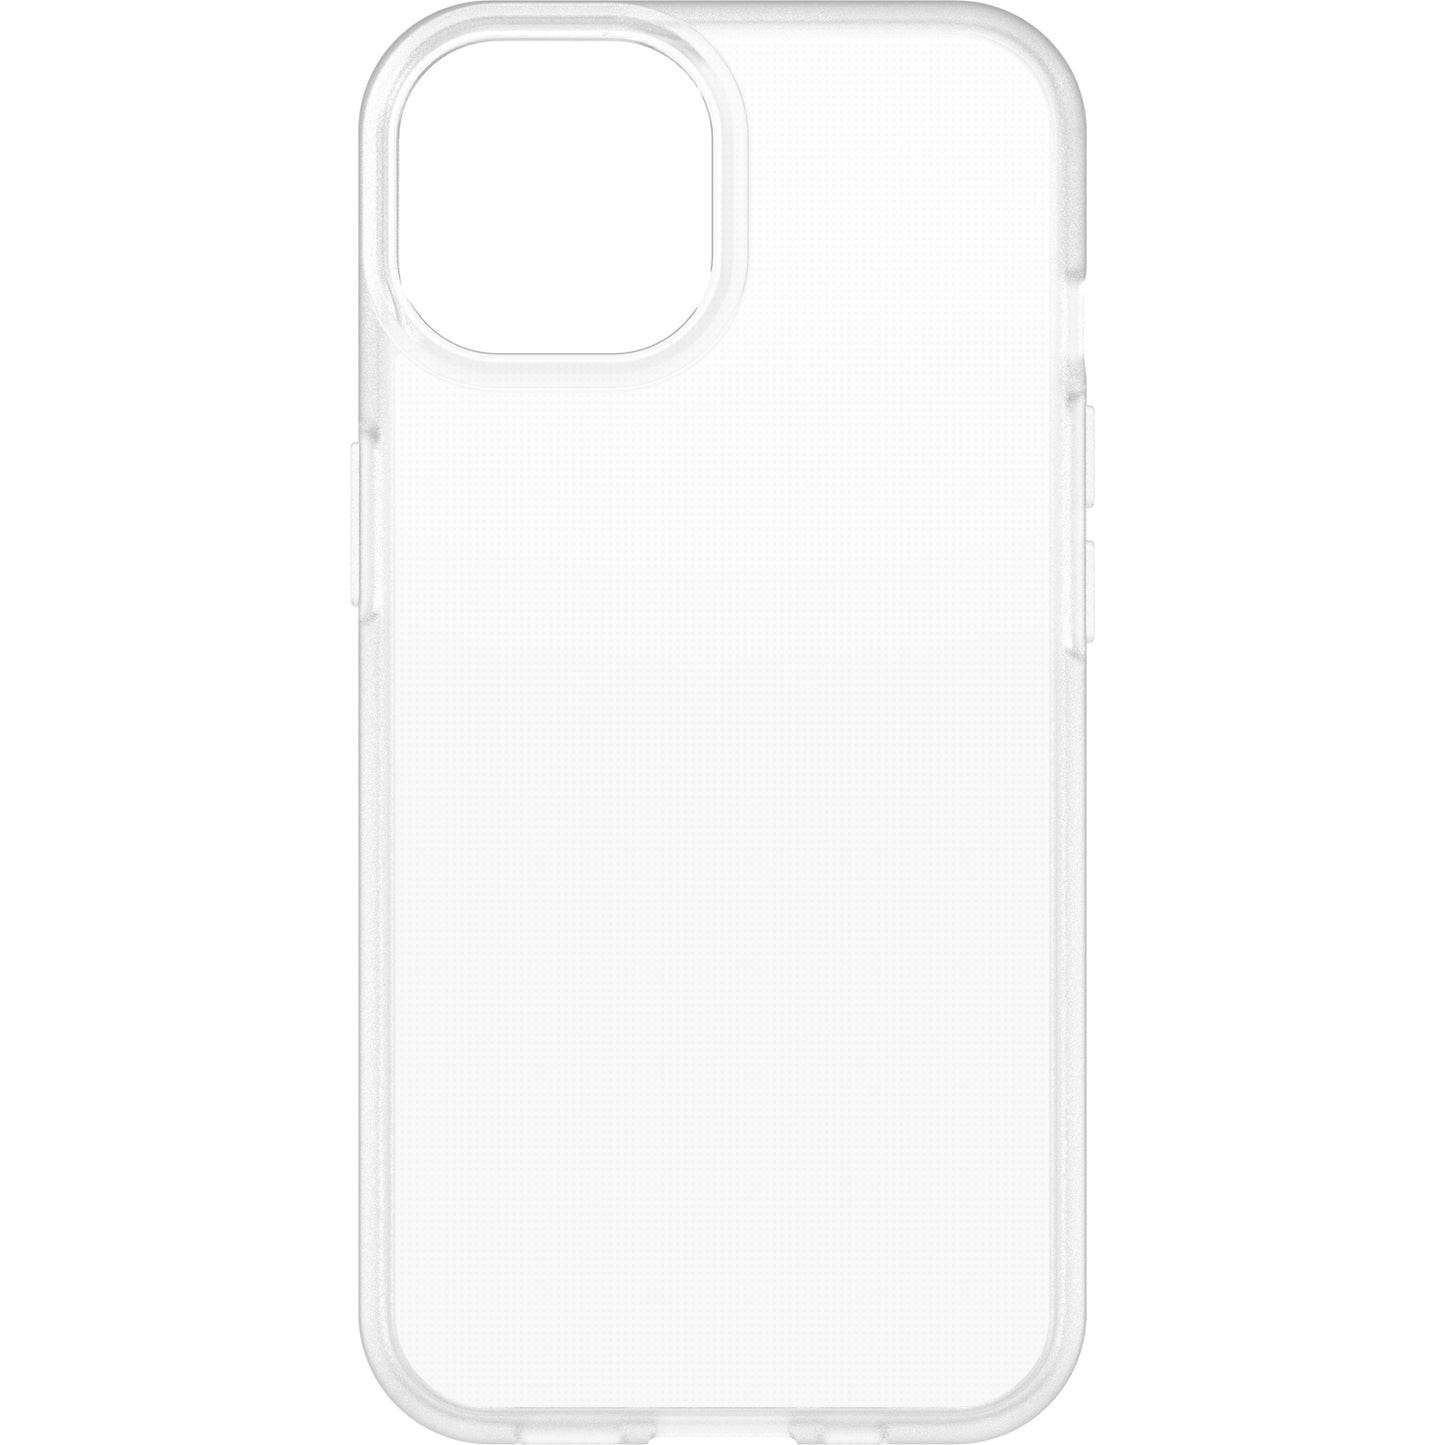 Pack para iPhone 14 funda React y Cristal Anti-Microbial de Otterbox iPhone 14 Pro Max - Rossellimac